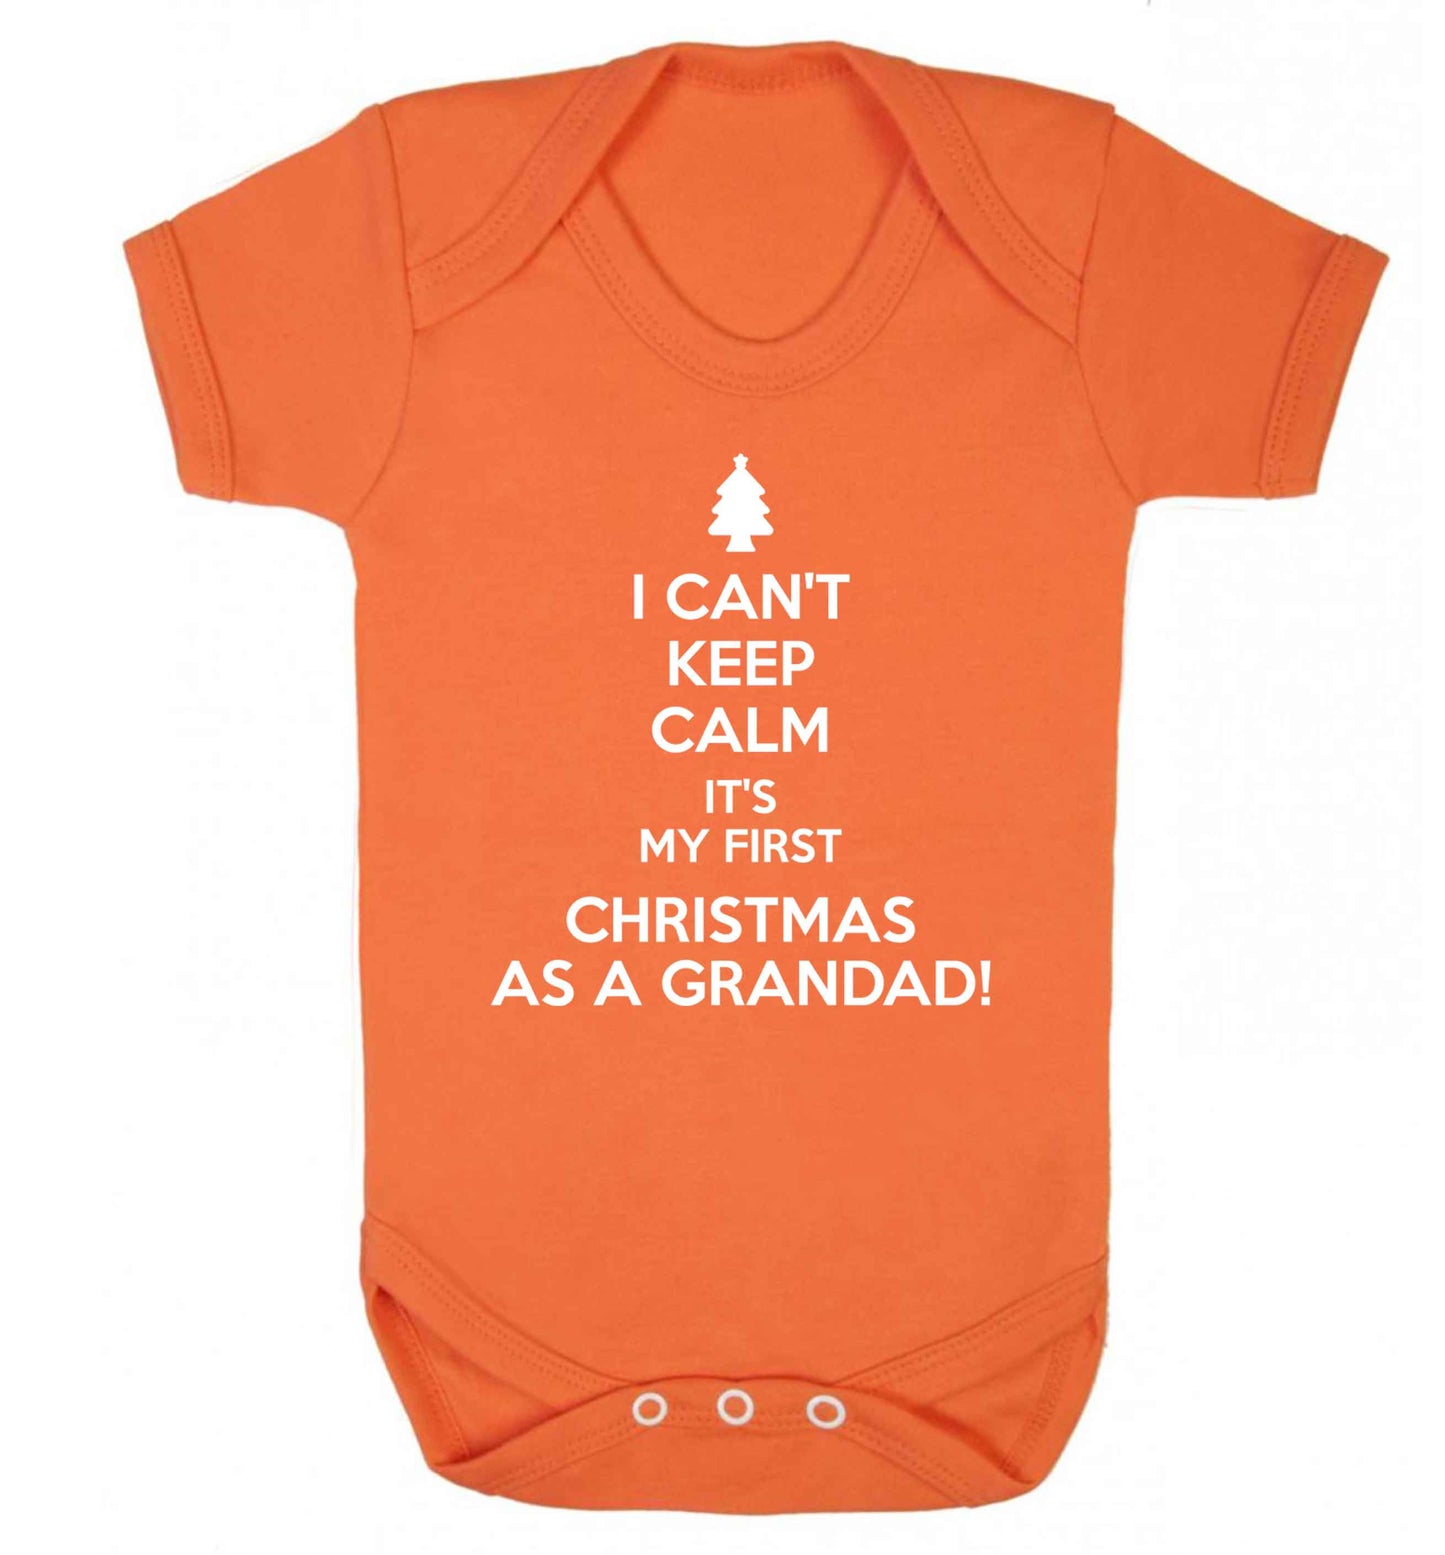 I can't keep calm it's my first Christmas as a grandad! Baby Vest orange 18-24 months